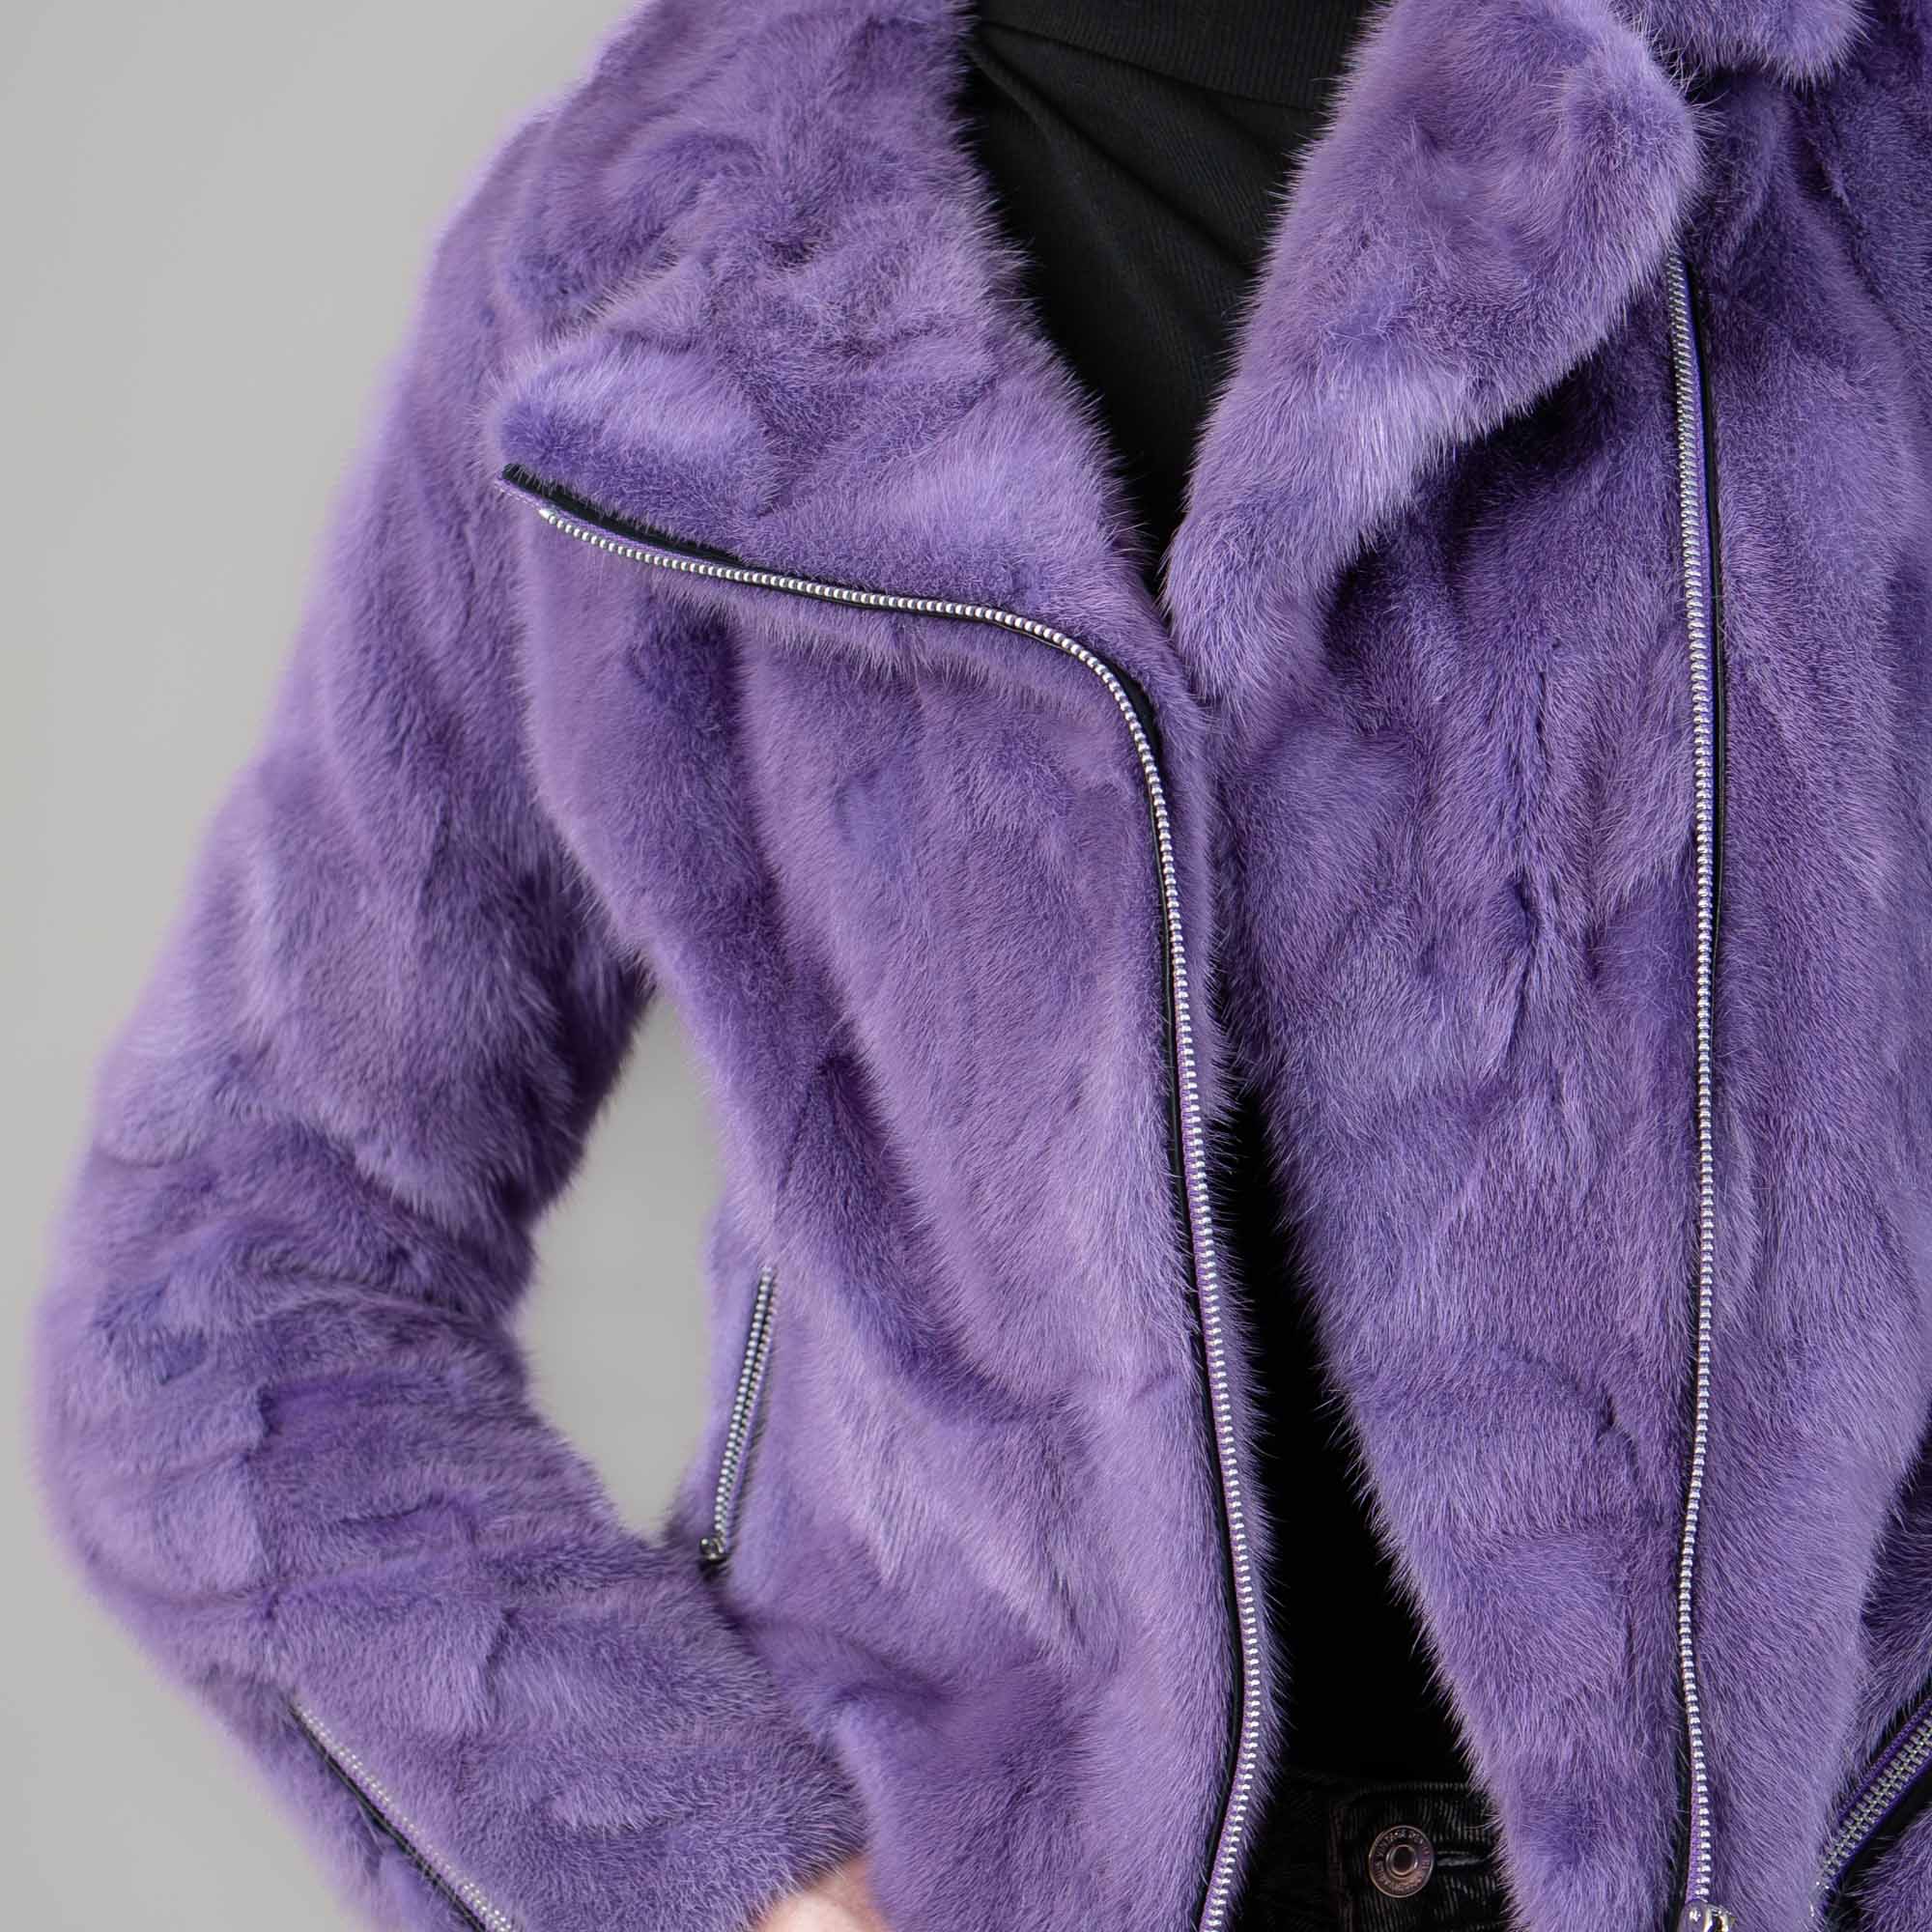 Mink fur jacket with a collar in purple color